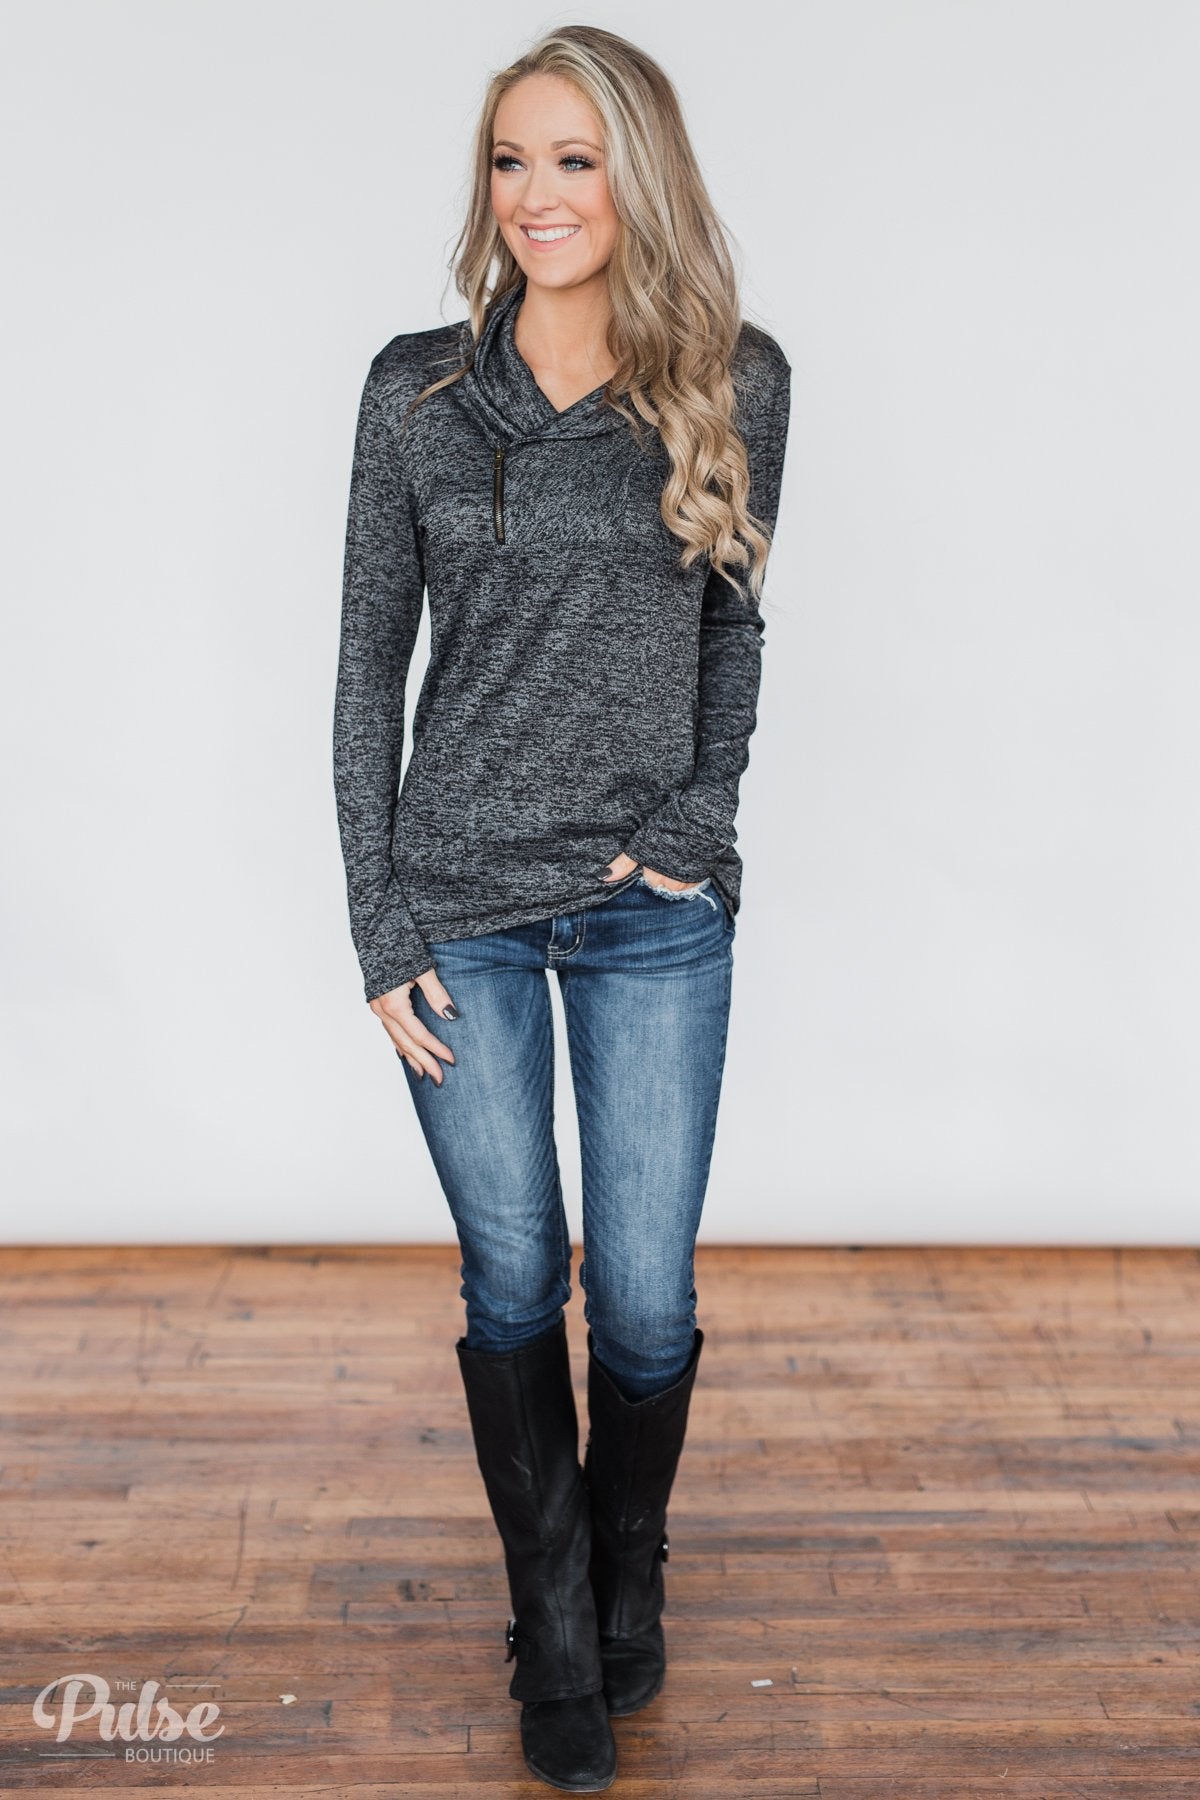 All This Time Zipper Pullover Top- Heather Black